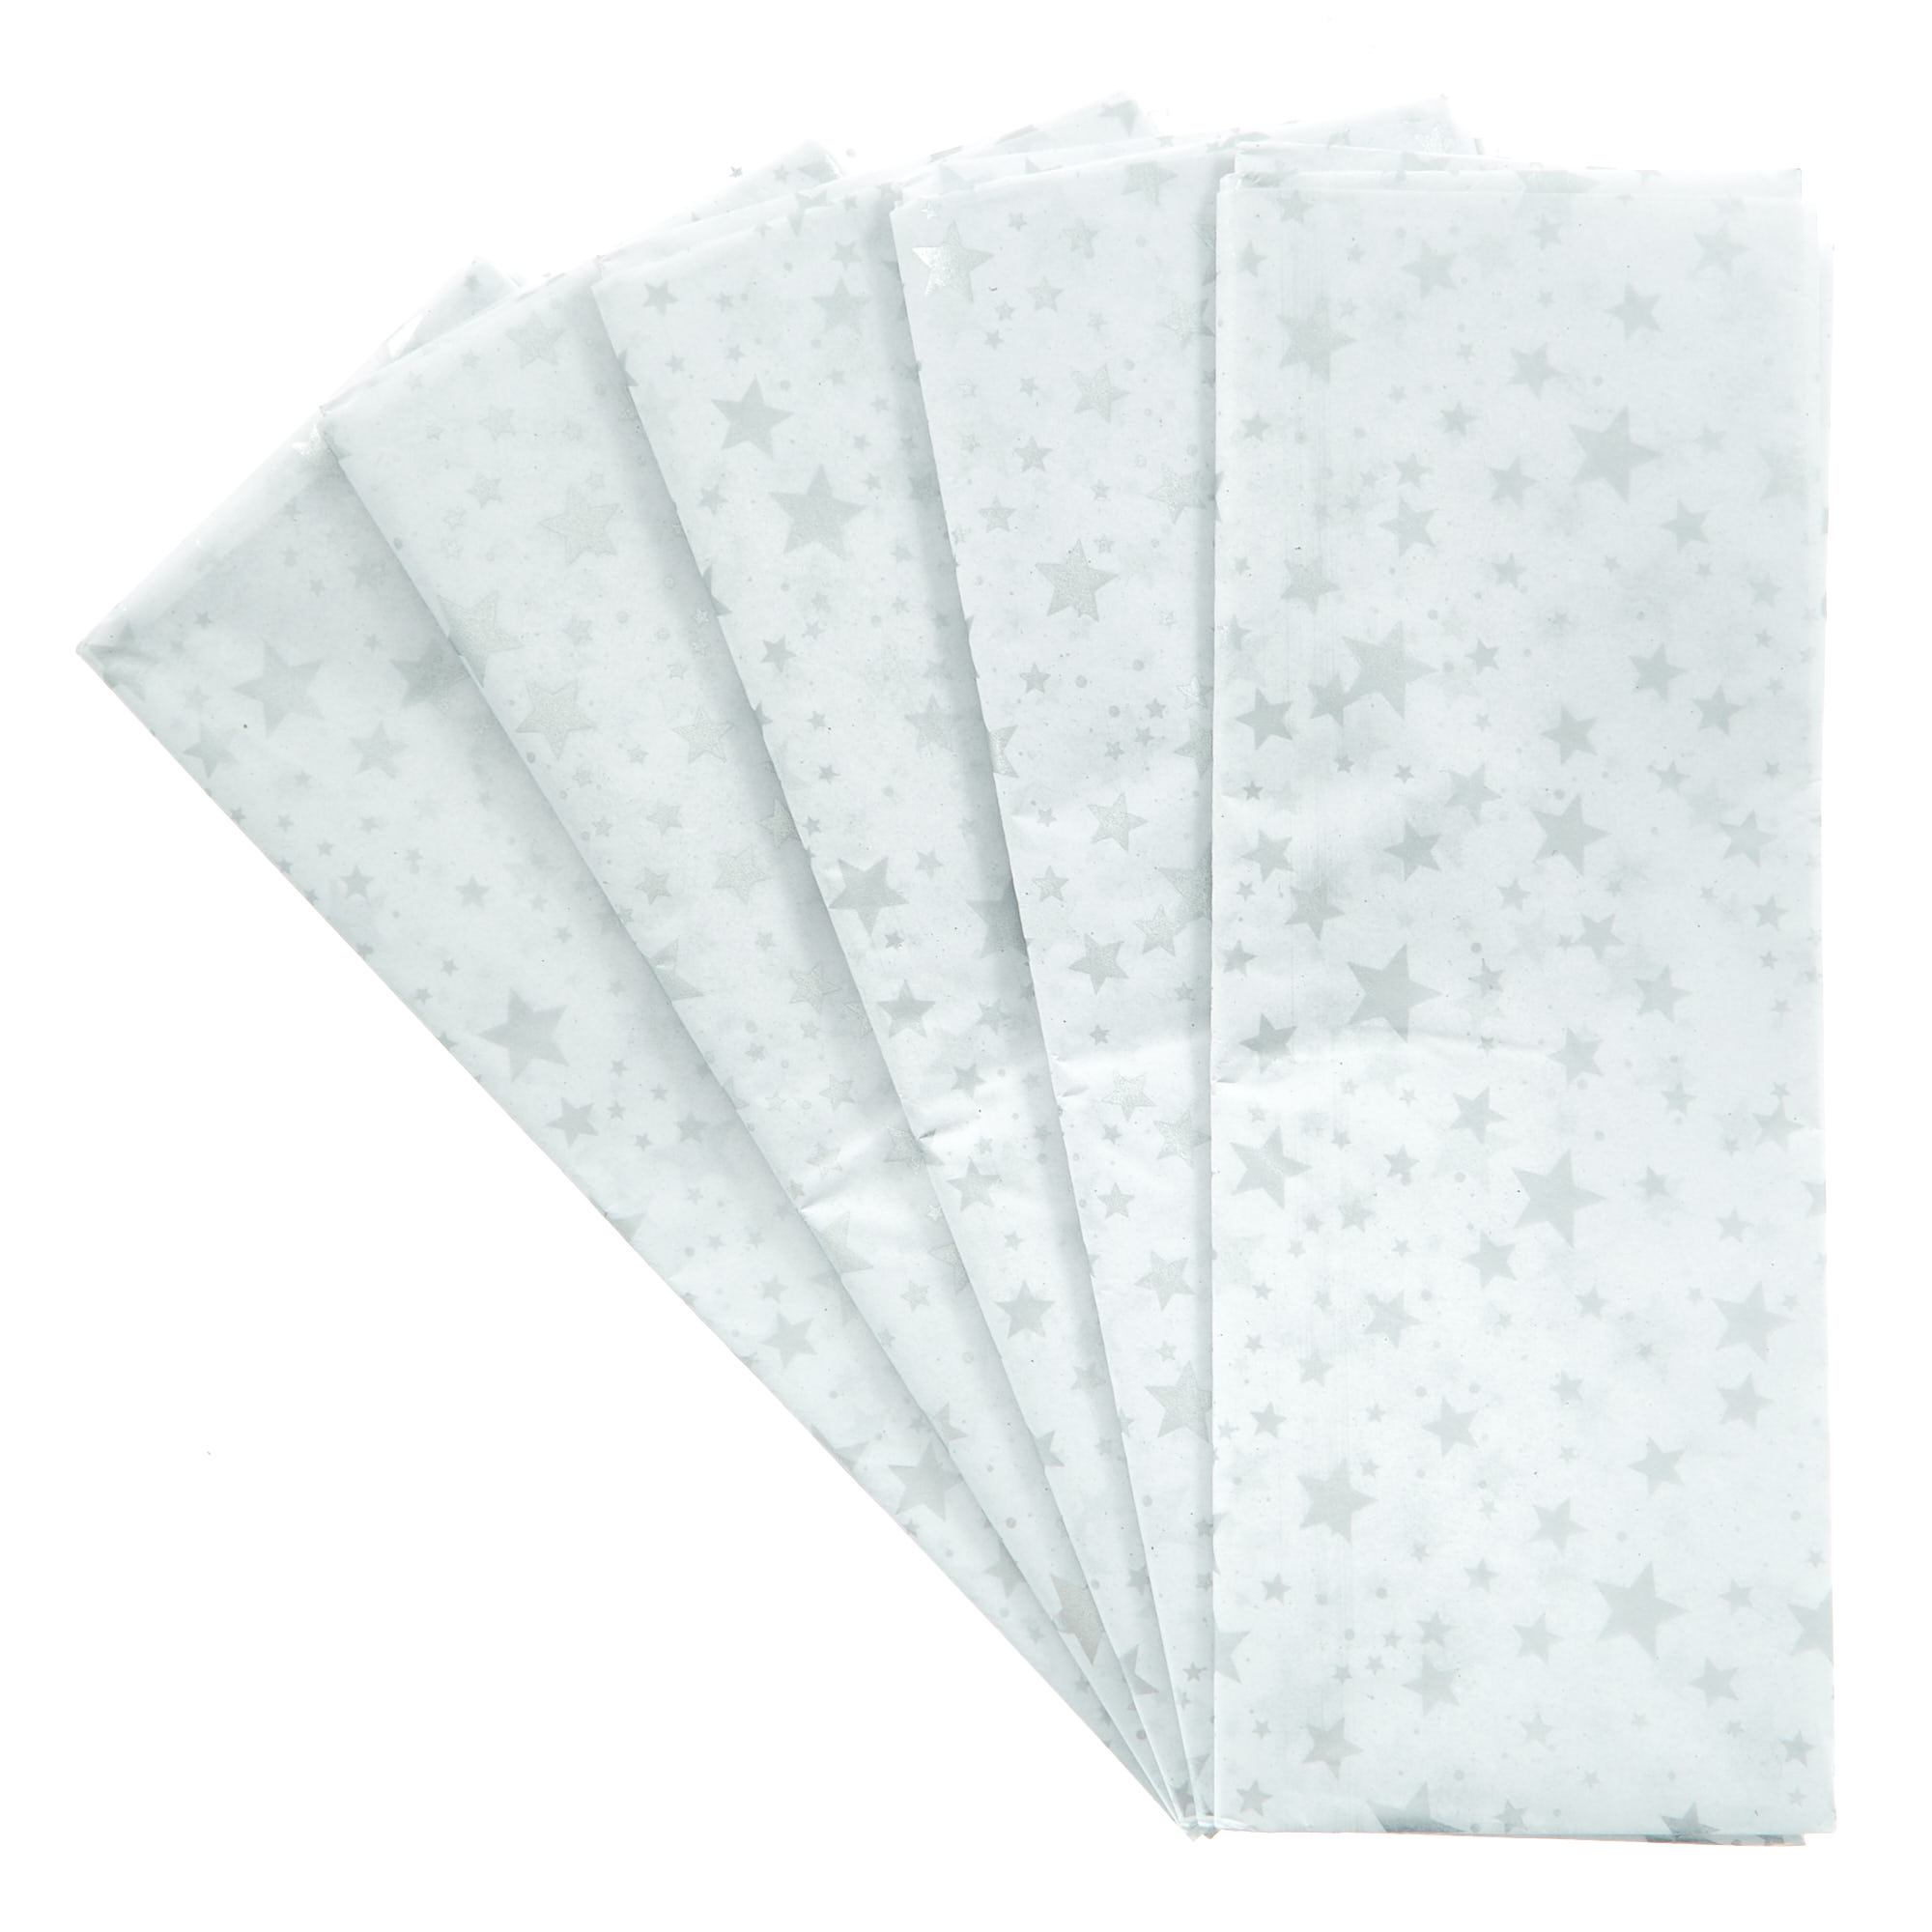 Buy White & Silver Starry Tissue Paper - 5 Sheets for GBP 0.99 | Card ...